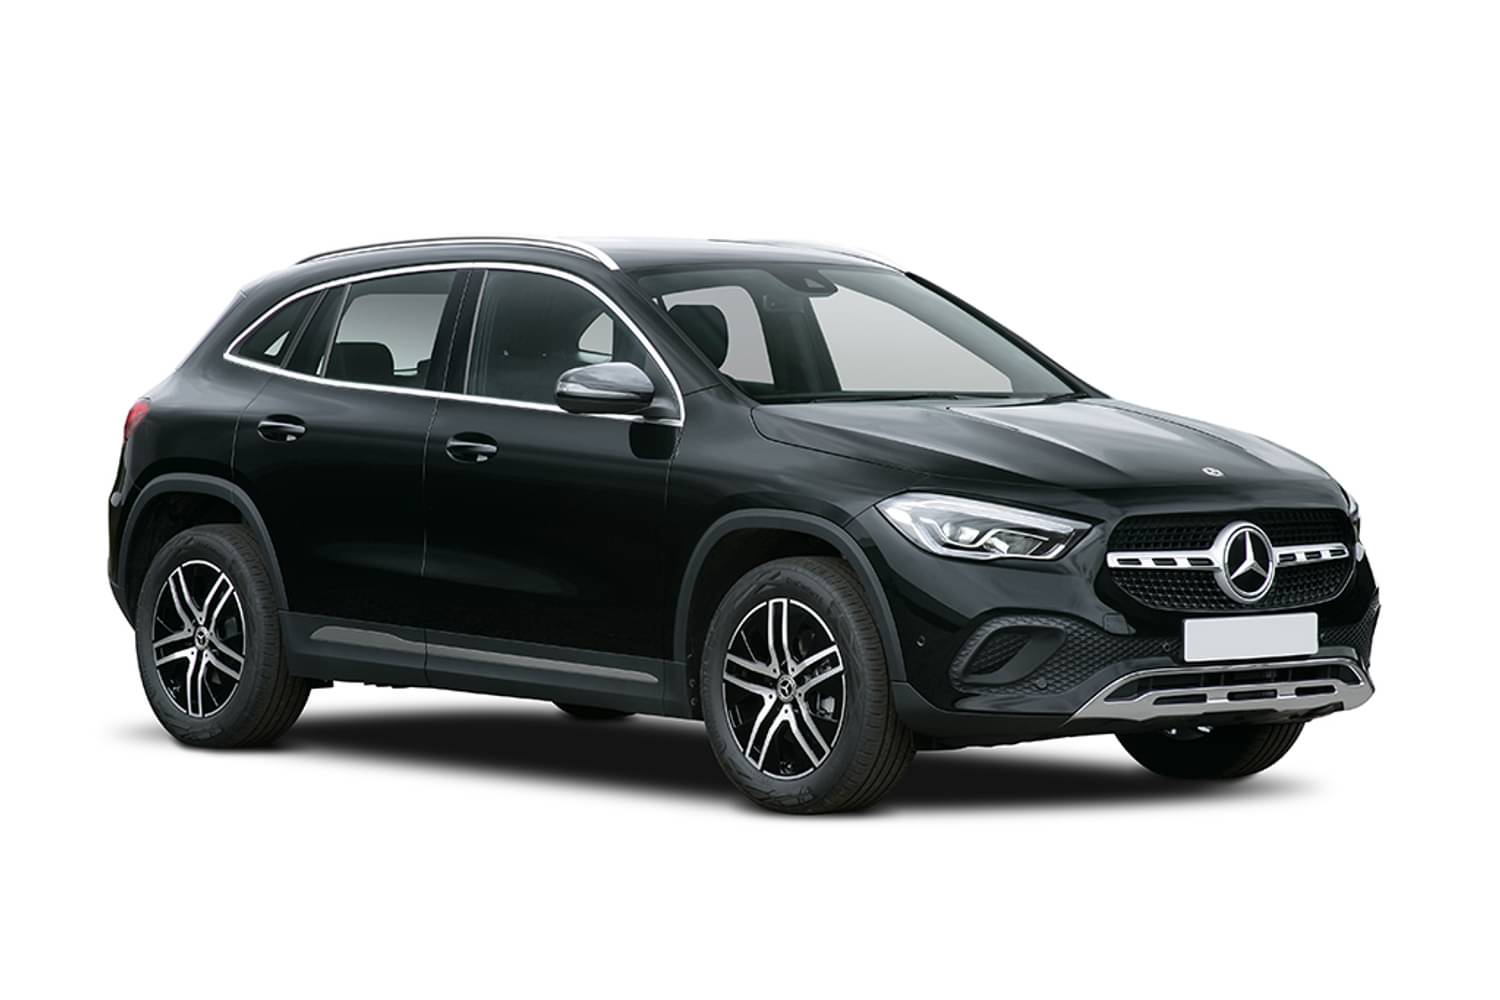 New Mercedes Benz Gla Hatchback Special Editions Gla 250e Exclusive Edition 5 Door Auto For Sale